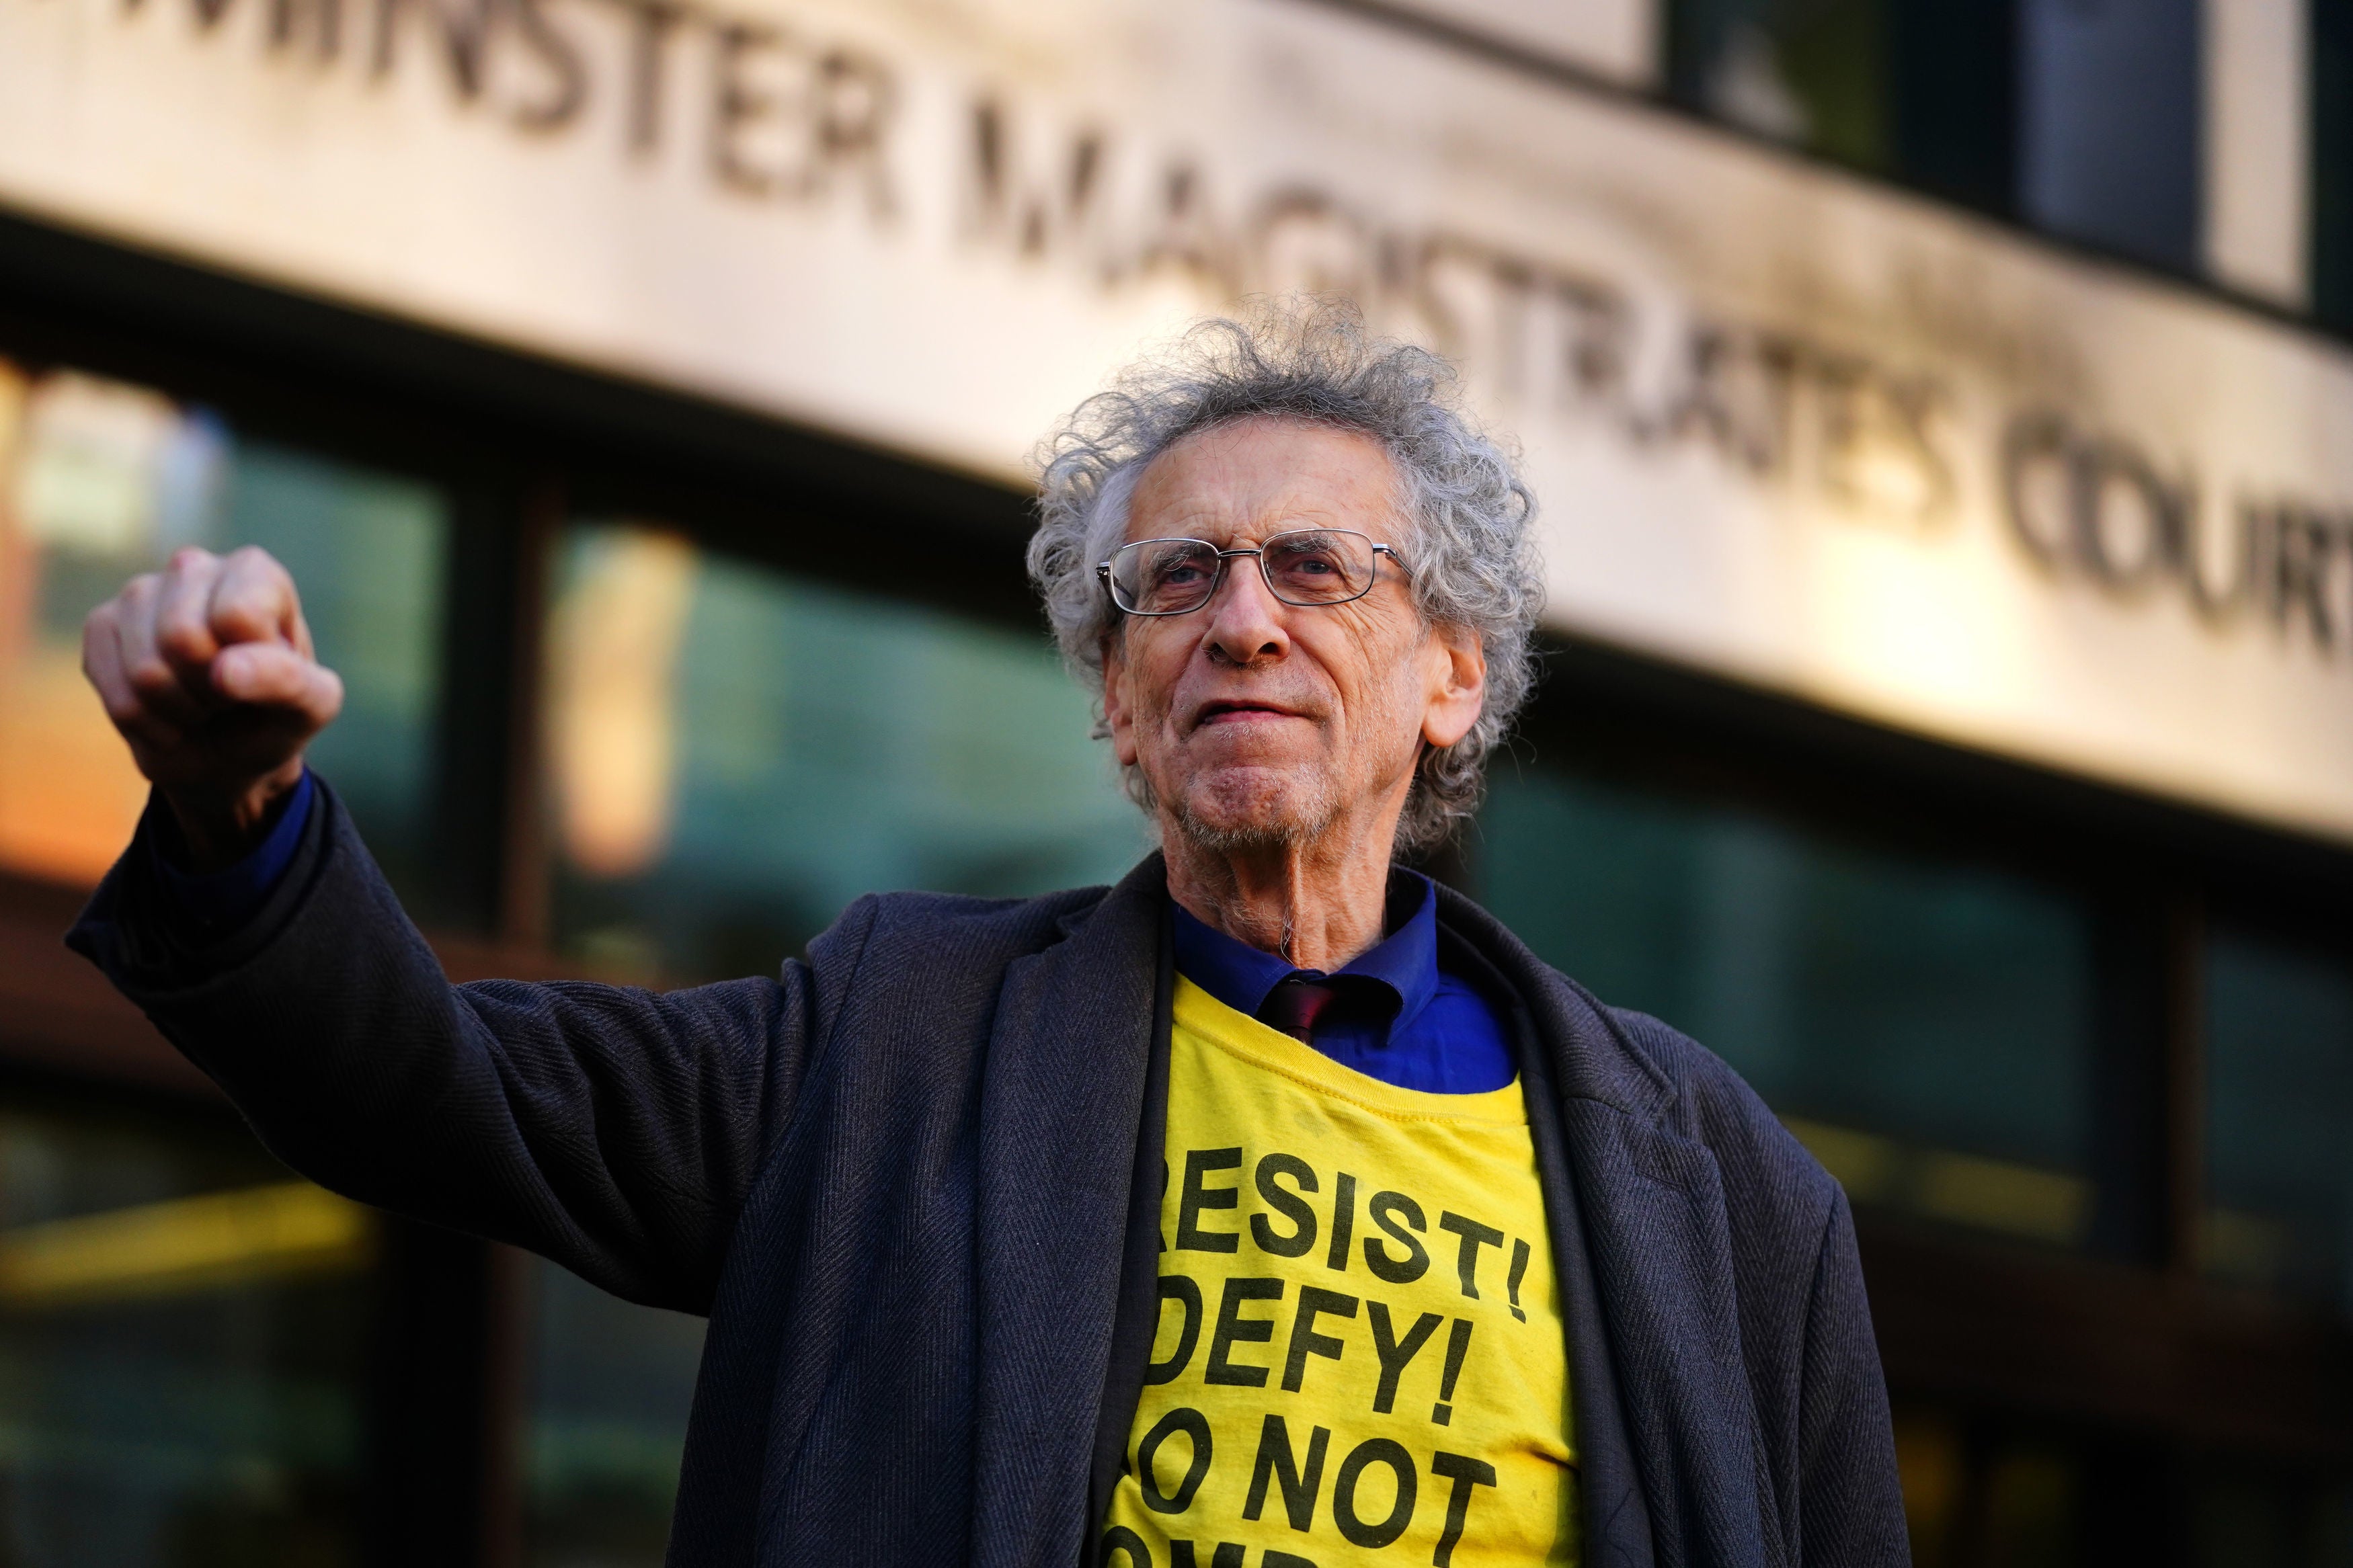 Piers Corbyn arriving at Westminster Magistrates’ Court, London, where he faces a series of charges relating to a breach of lockdown rules during protests last year.